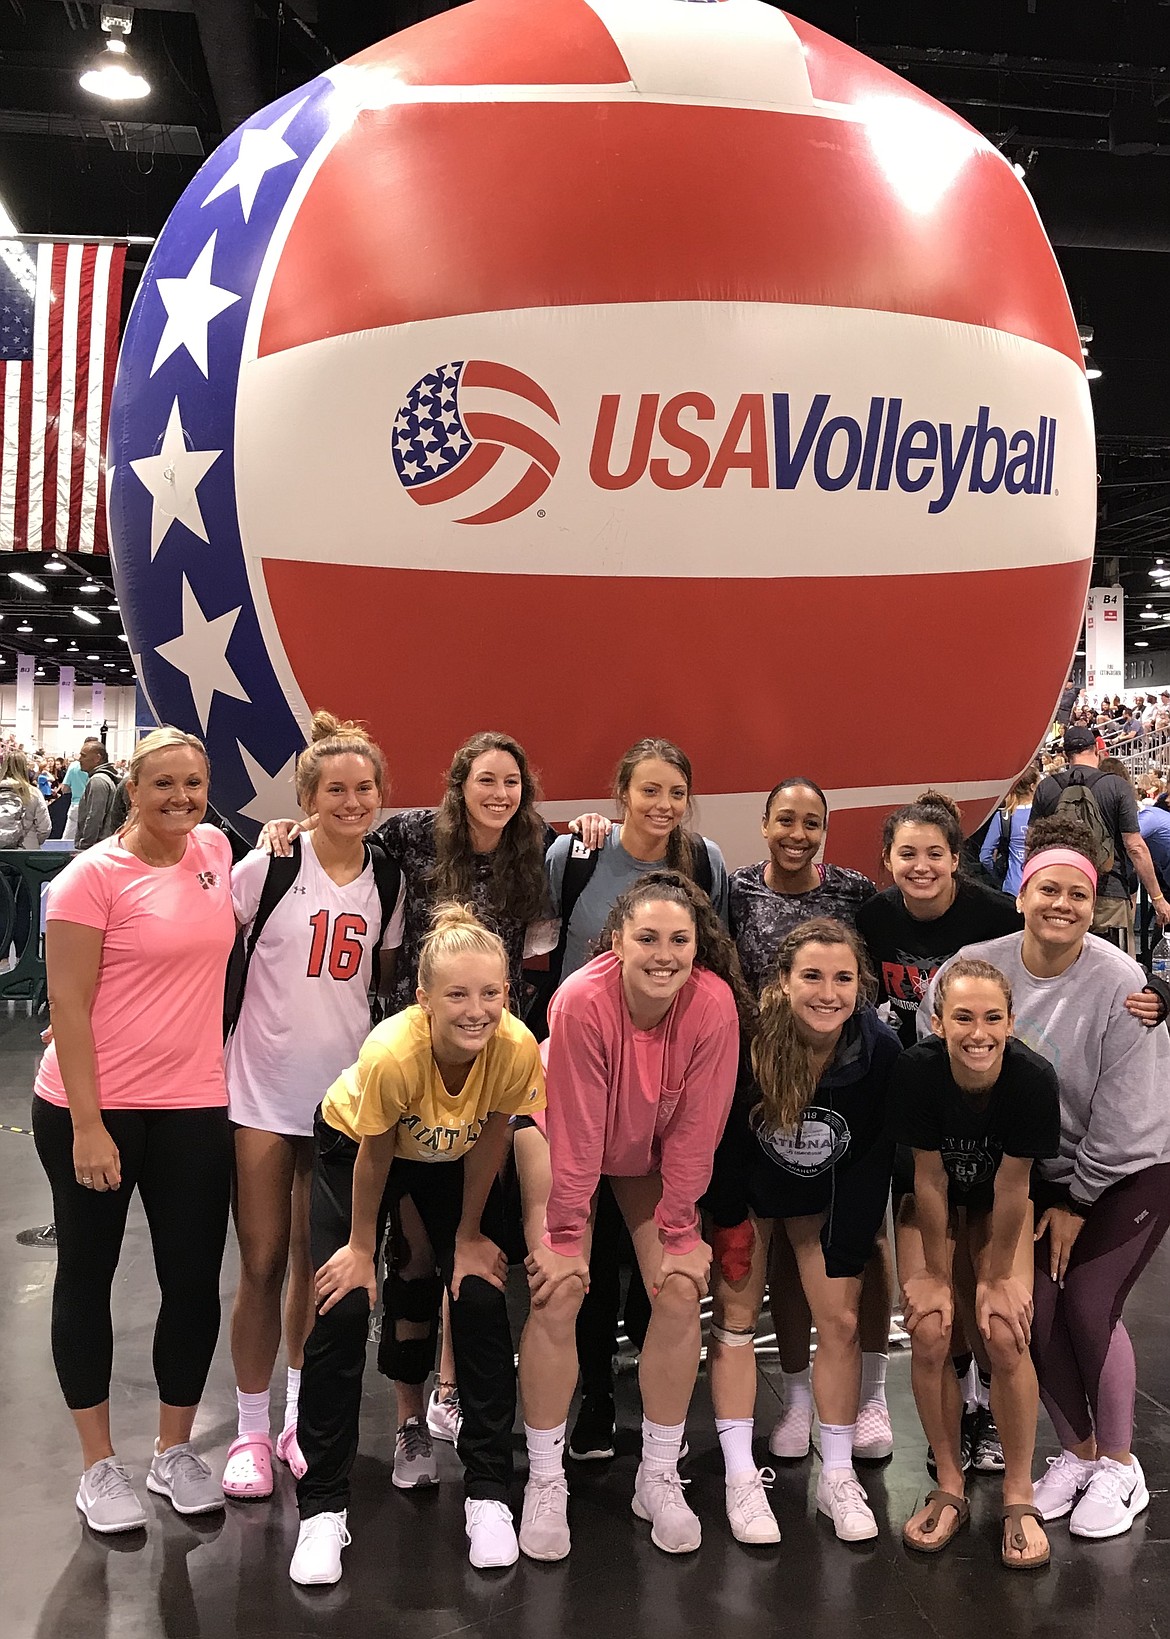 Courtesy photo
The Renovators under-18 volleyball team finished fifth in the gold bracket in the National division at the USA Volleyball U18 national tournament April 26-29 in Anaheim, Calif. The Renovators qualified through their Evergreen Region. There were four divisions at nationals &#151; Open (36 teams), National (48 teams), USA (48 teams) and American (64 teams). It was the highest finish for a first-year club team in our region since 2005. In the front row from left are Arlaina Stephenson, Kelly Horning, Reilley Chapman and Klaire Mitchell; and back row from left, coach Kari Chavez, Tessa Sarff, Rachael Schlect, Allison Munday, Kaitlyn White, Katherine McEuen and coach Mackenzie Hamilton.